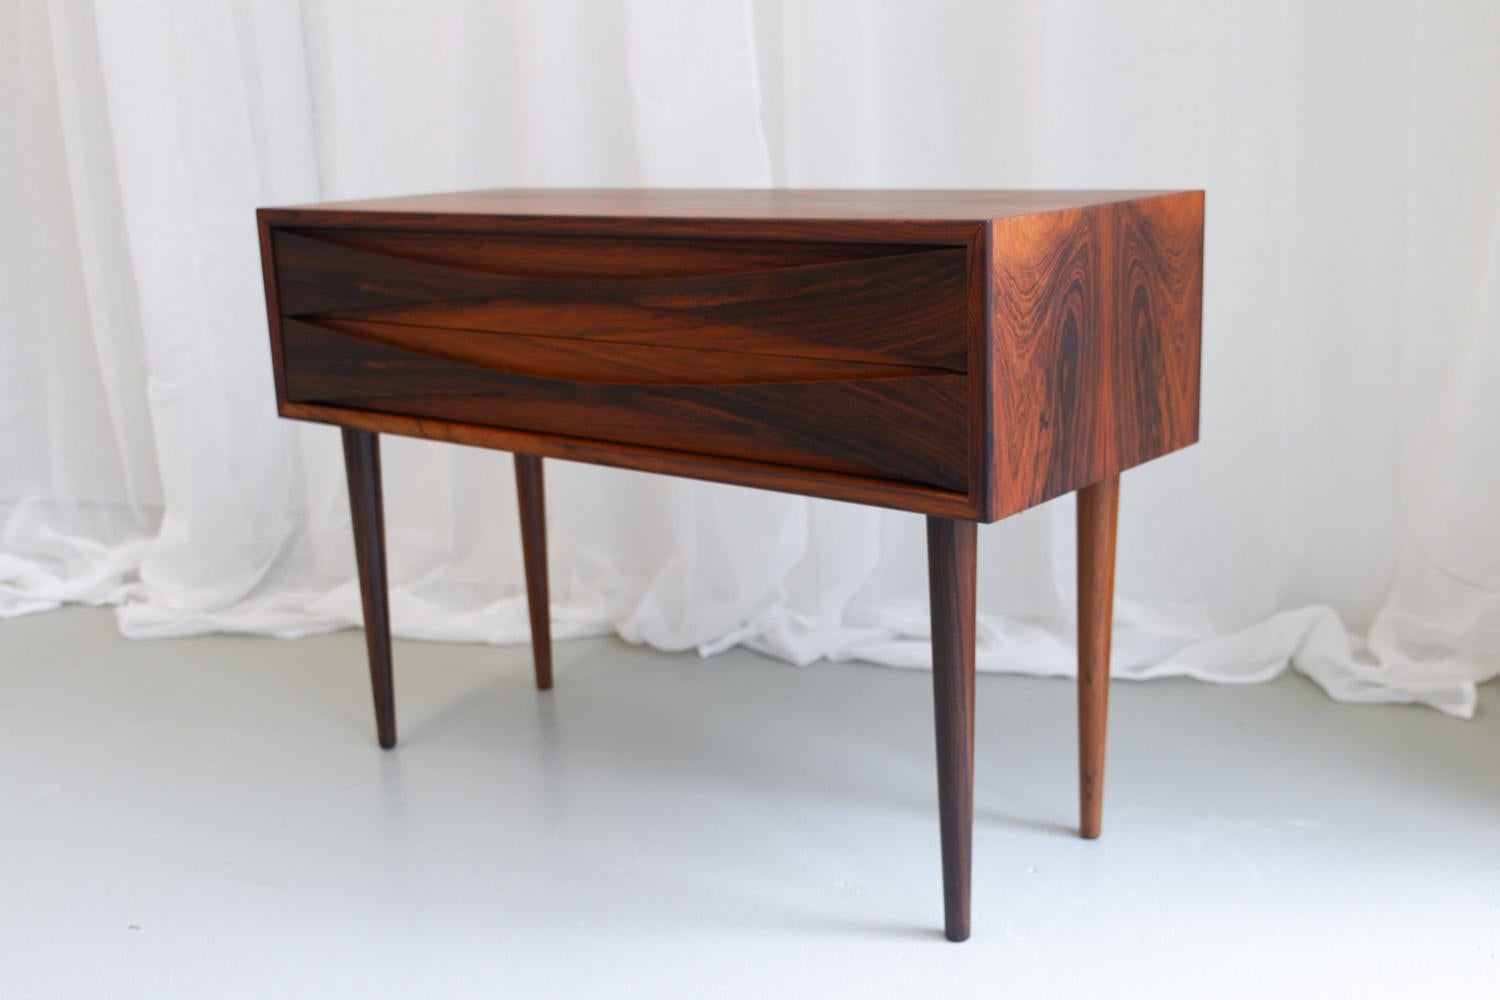 Mid-20th Century Danish Modern Rosewood Bedside Chest by Niels Clausen for NC Møbler, 1960s. For Sale